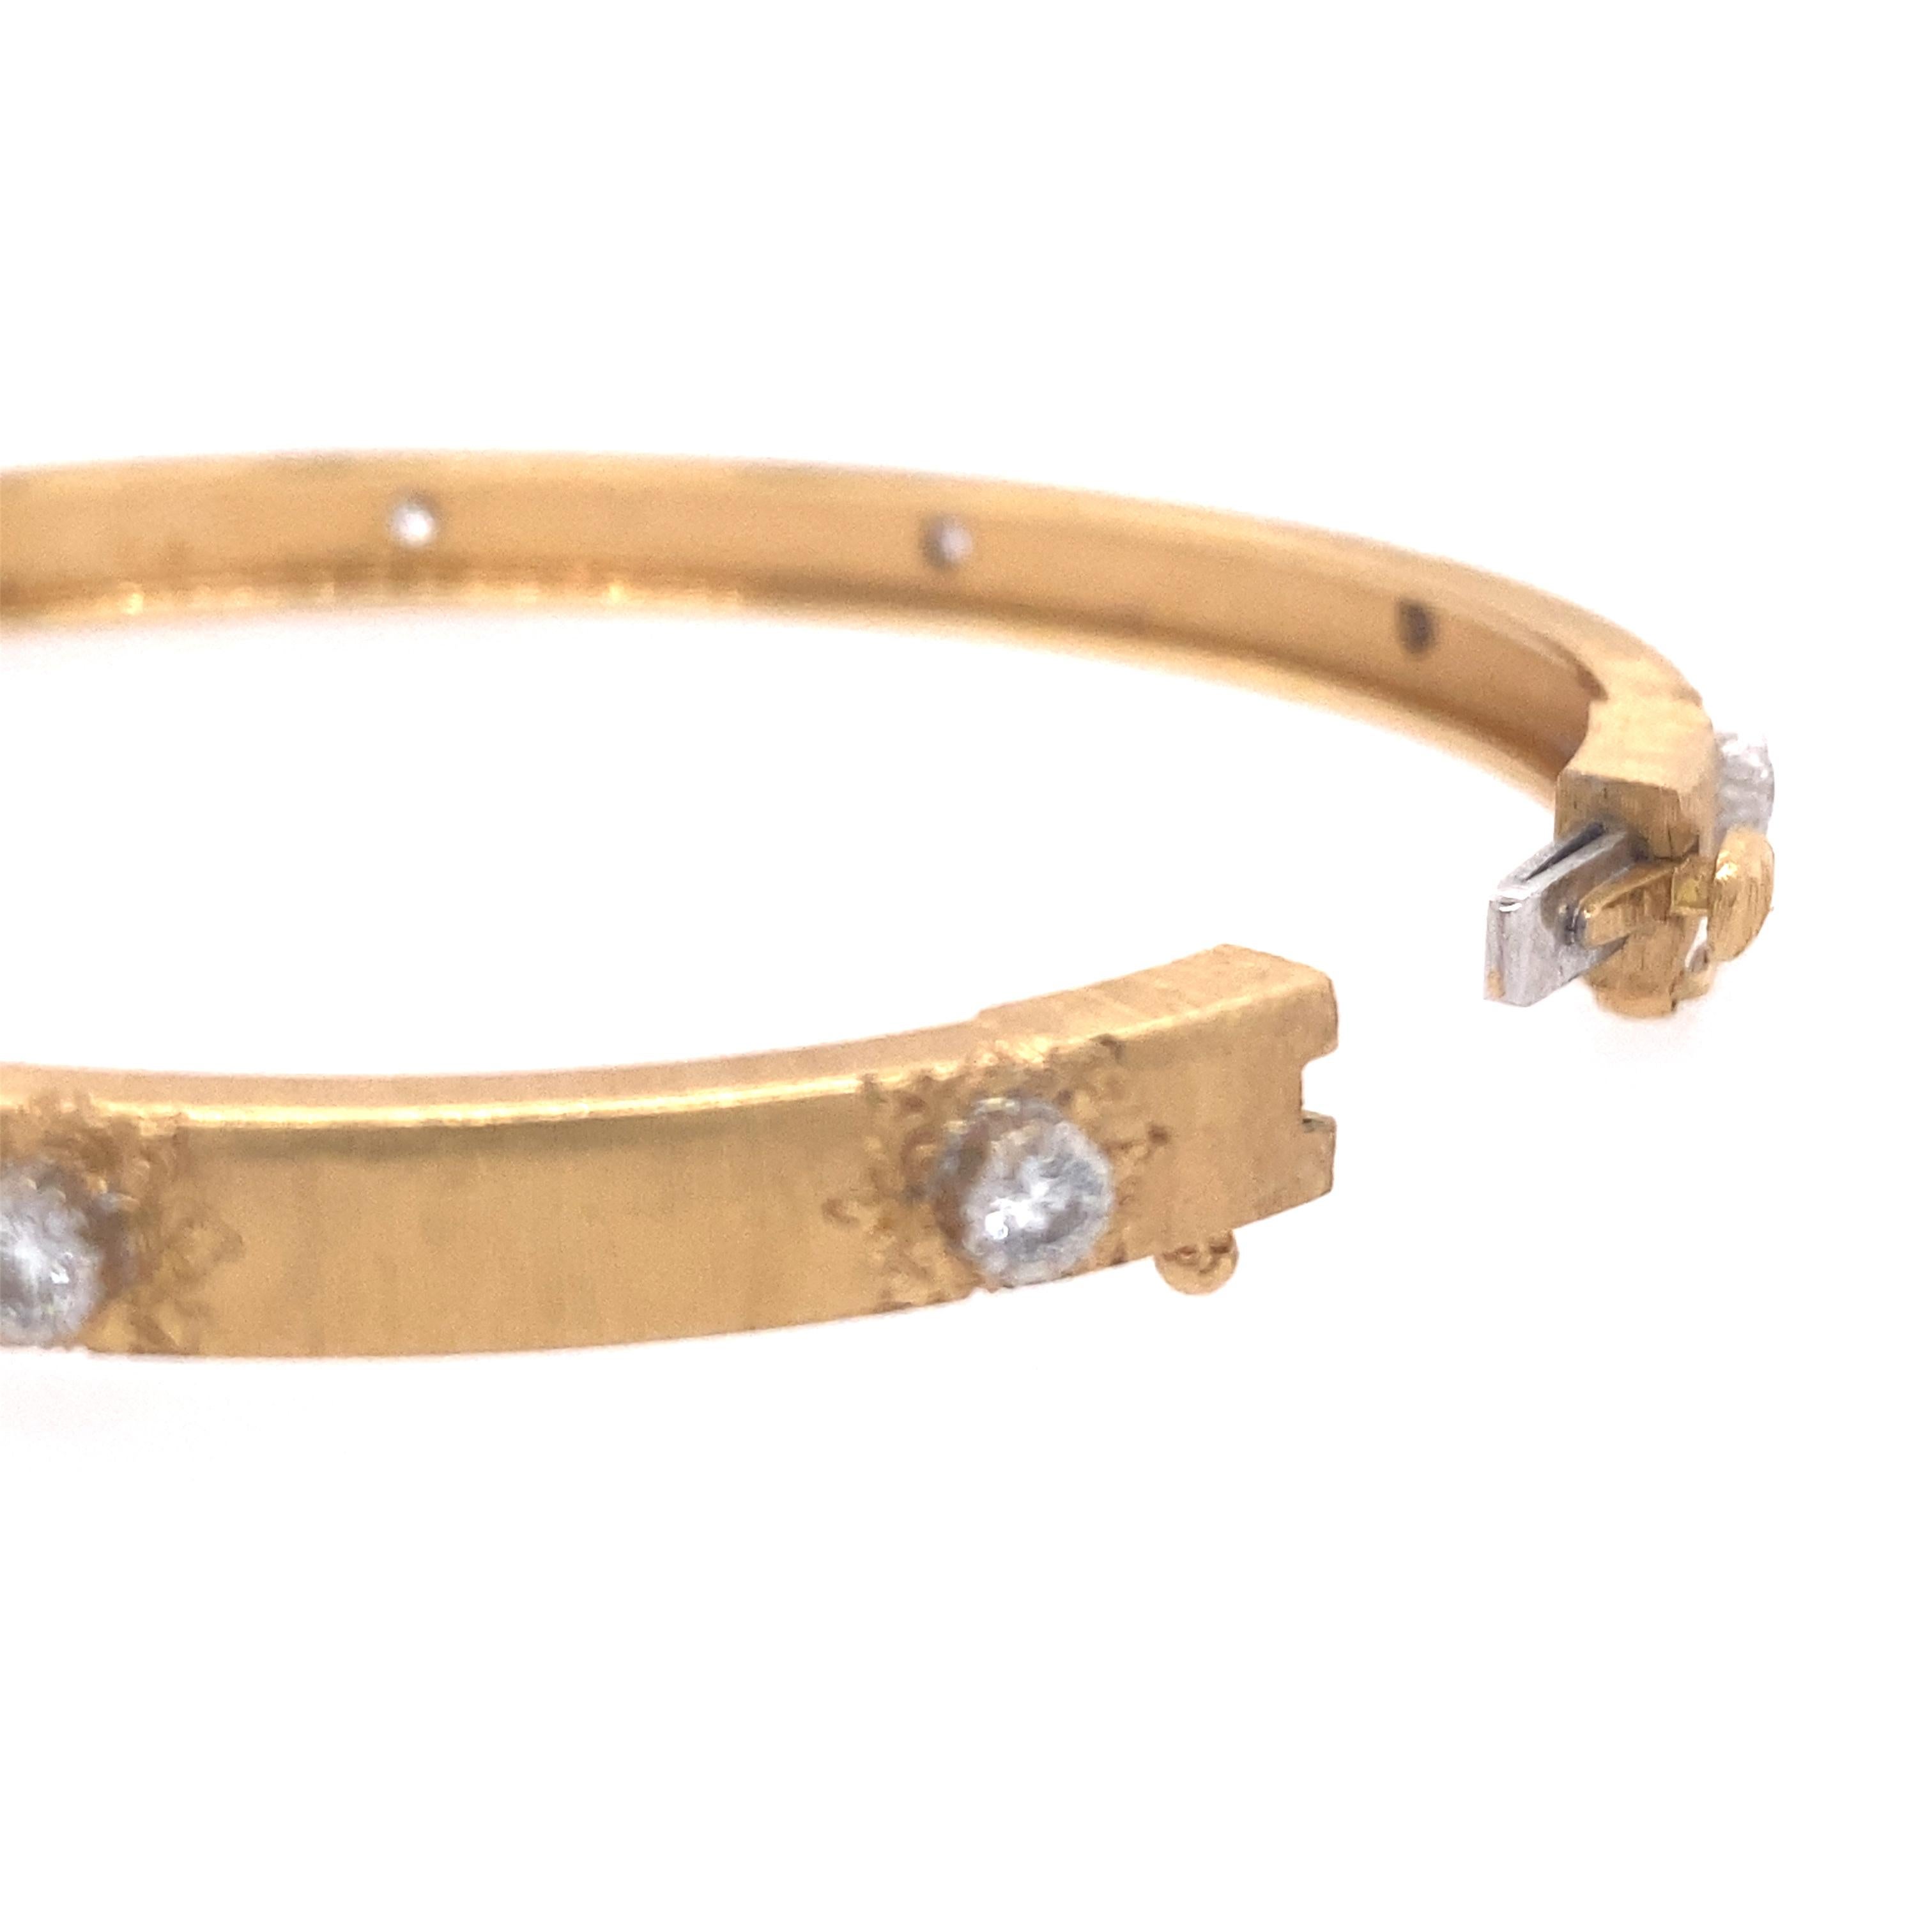 Buccellati 18k Yellow gold and diamond 'Marci Classica' Bangle Bracelet
Consisting of a brushed and engraved gold bangle containing 10 round brilliant cut diamonds weighing approximately 0.45 carat total, 
hinged with side clasp. 6 inches inner